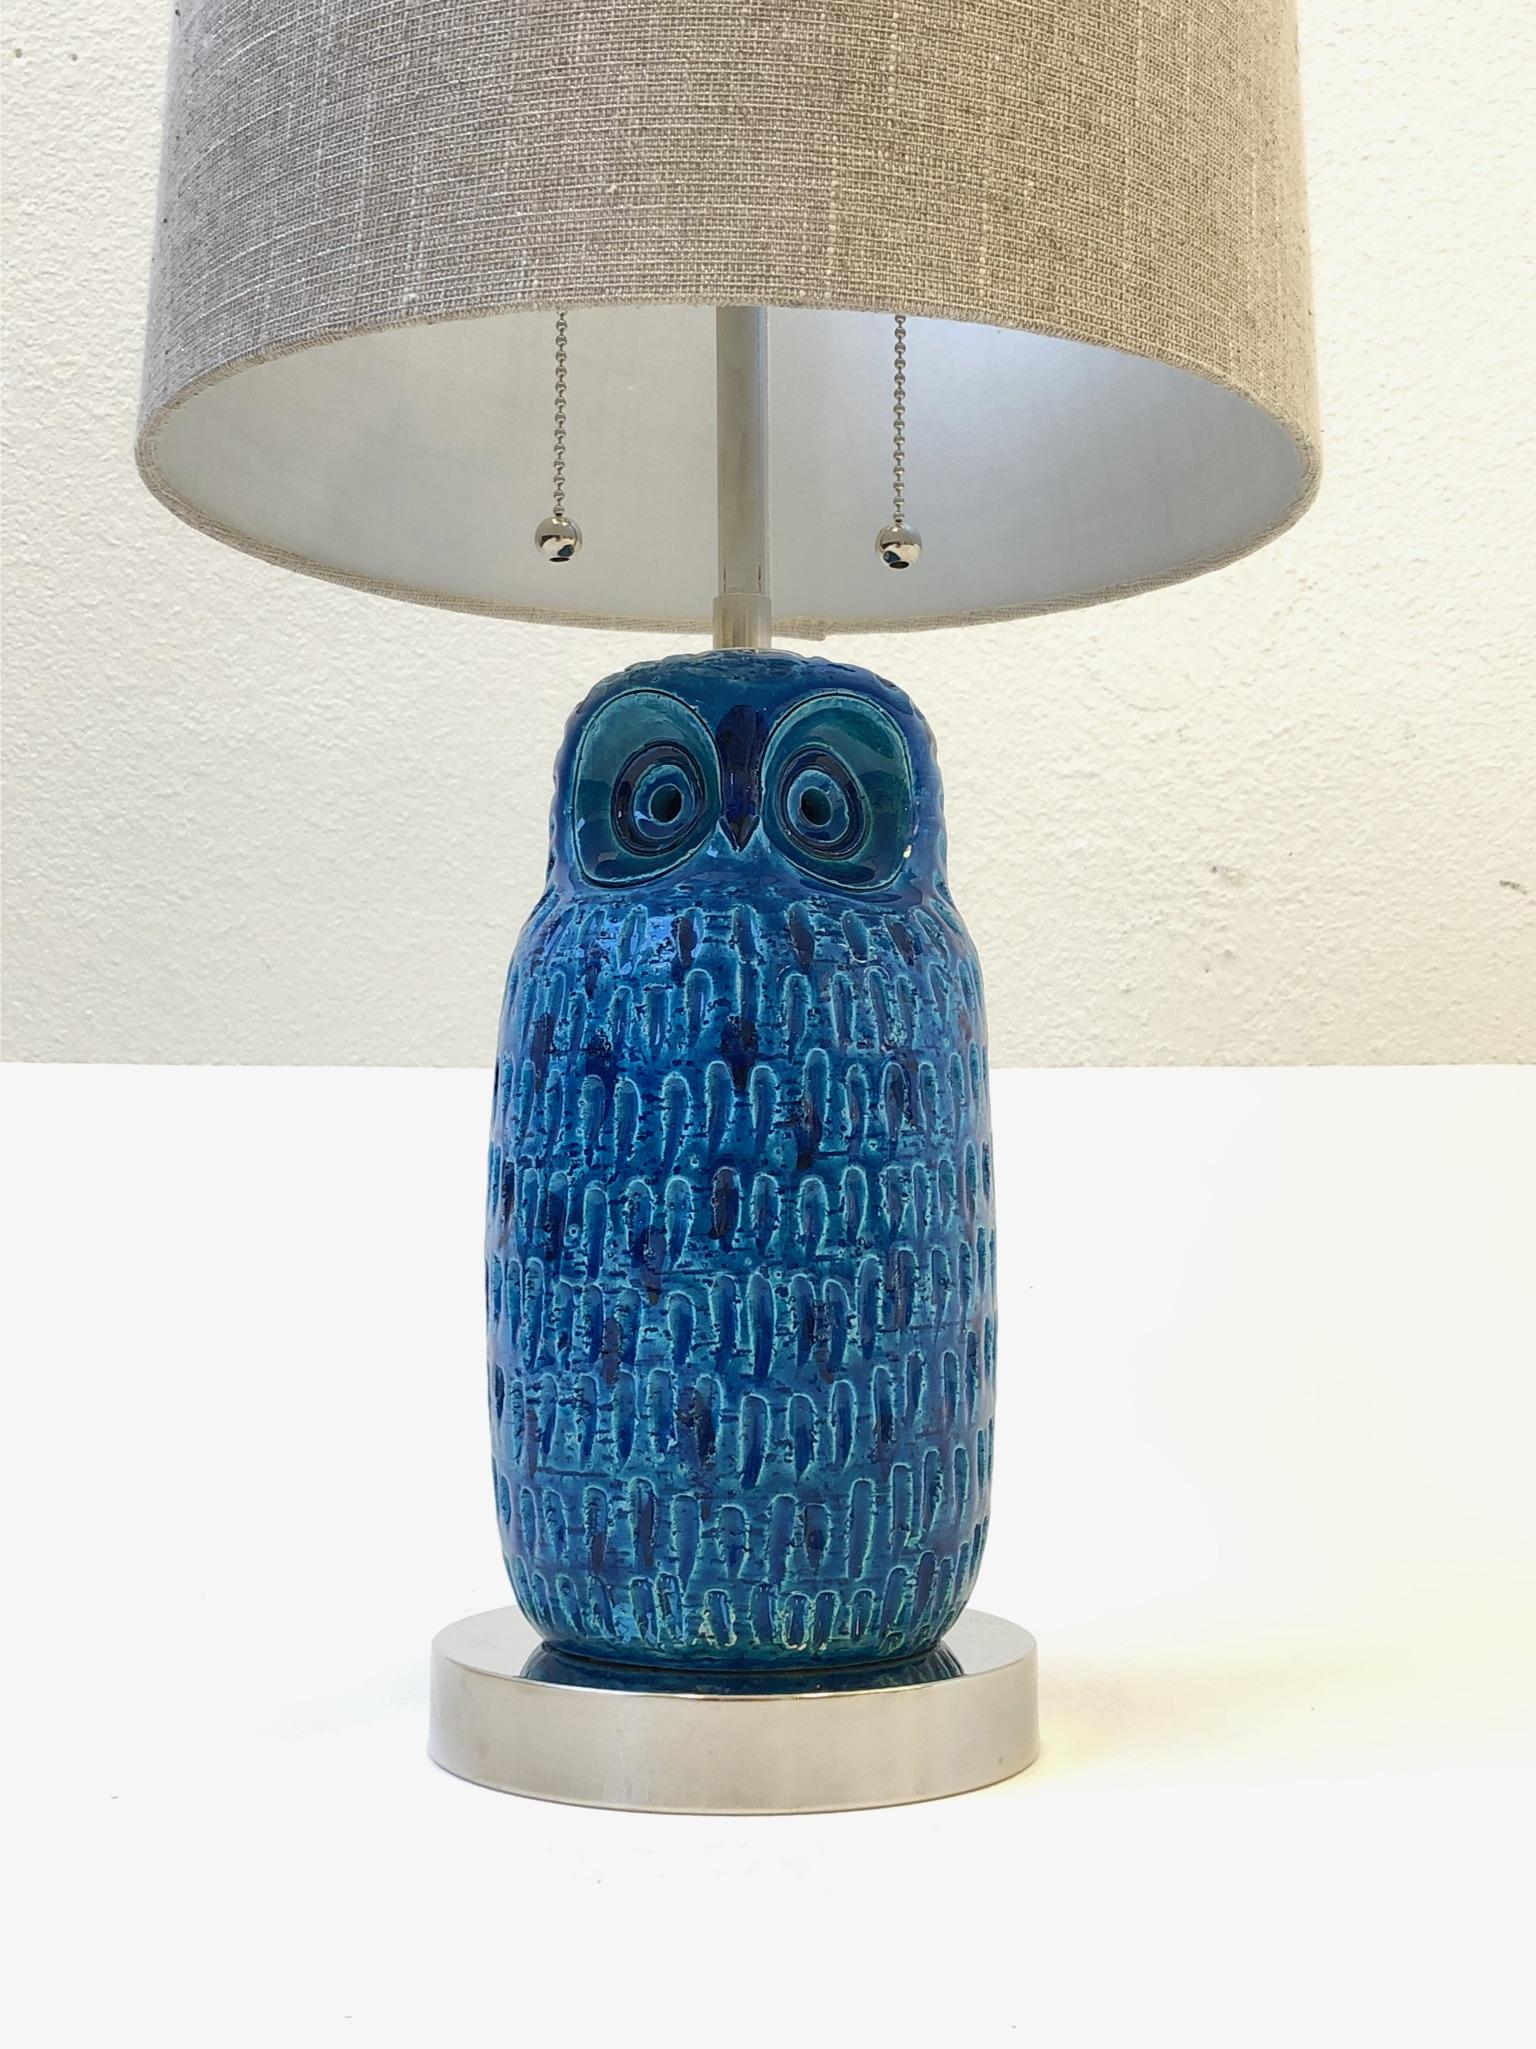 A rare Italian ceramic “Rimini Blue” owl table lamp designed in the 1960s by Aldo Londi for Bitossi. The lamp has been newly rewired with all new polished nickel hardware and a new oatmeal with silver strands linen shade.
Dimensions: 22” high 12”